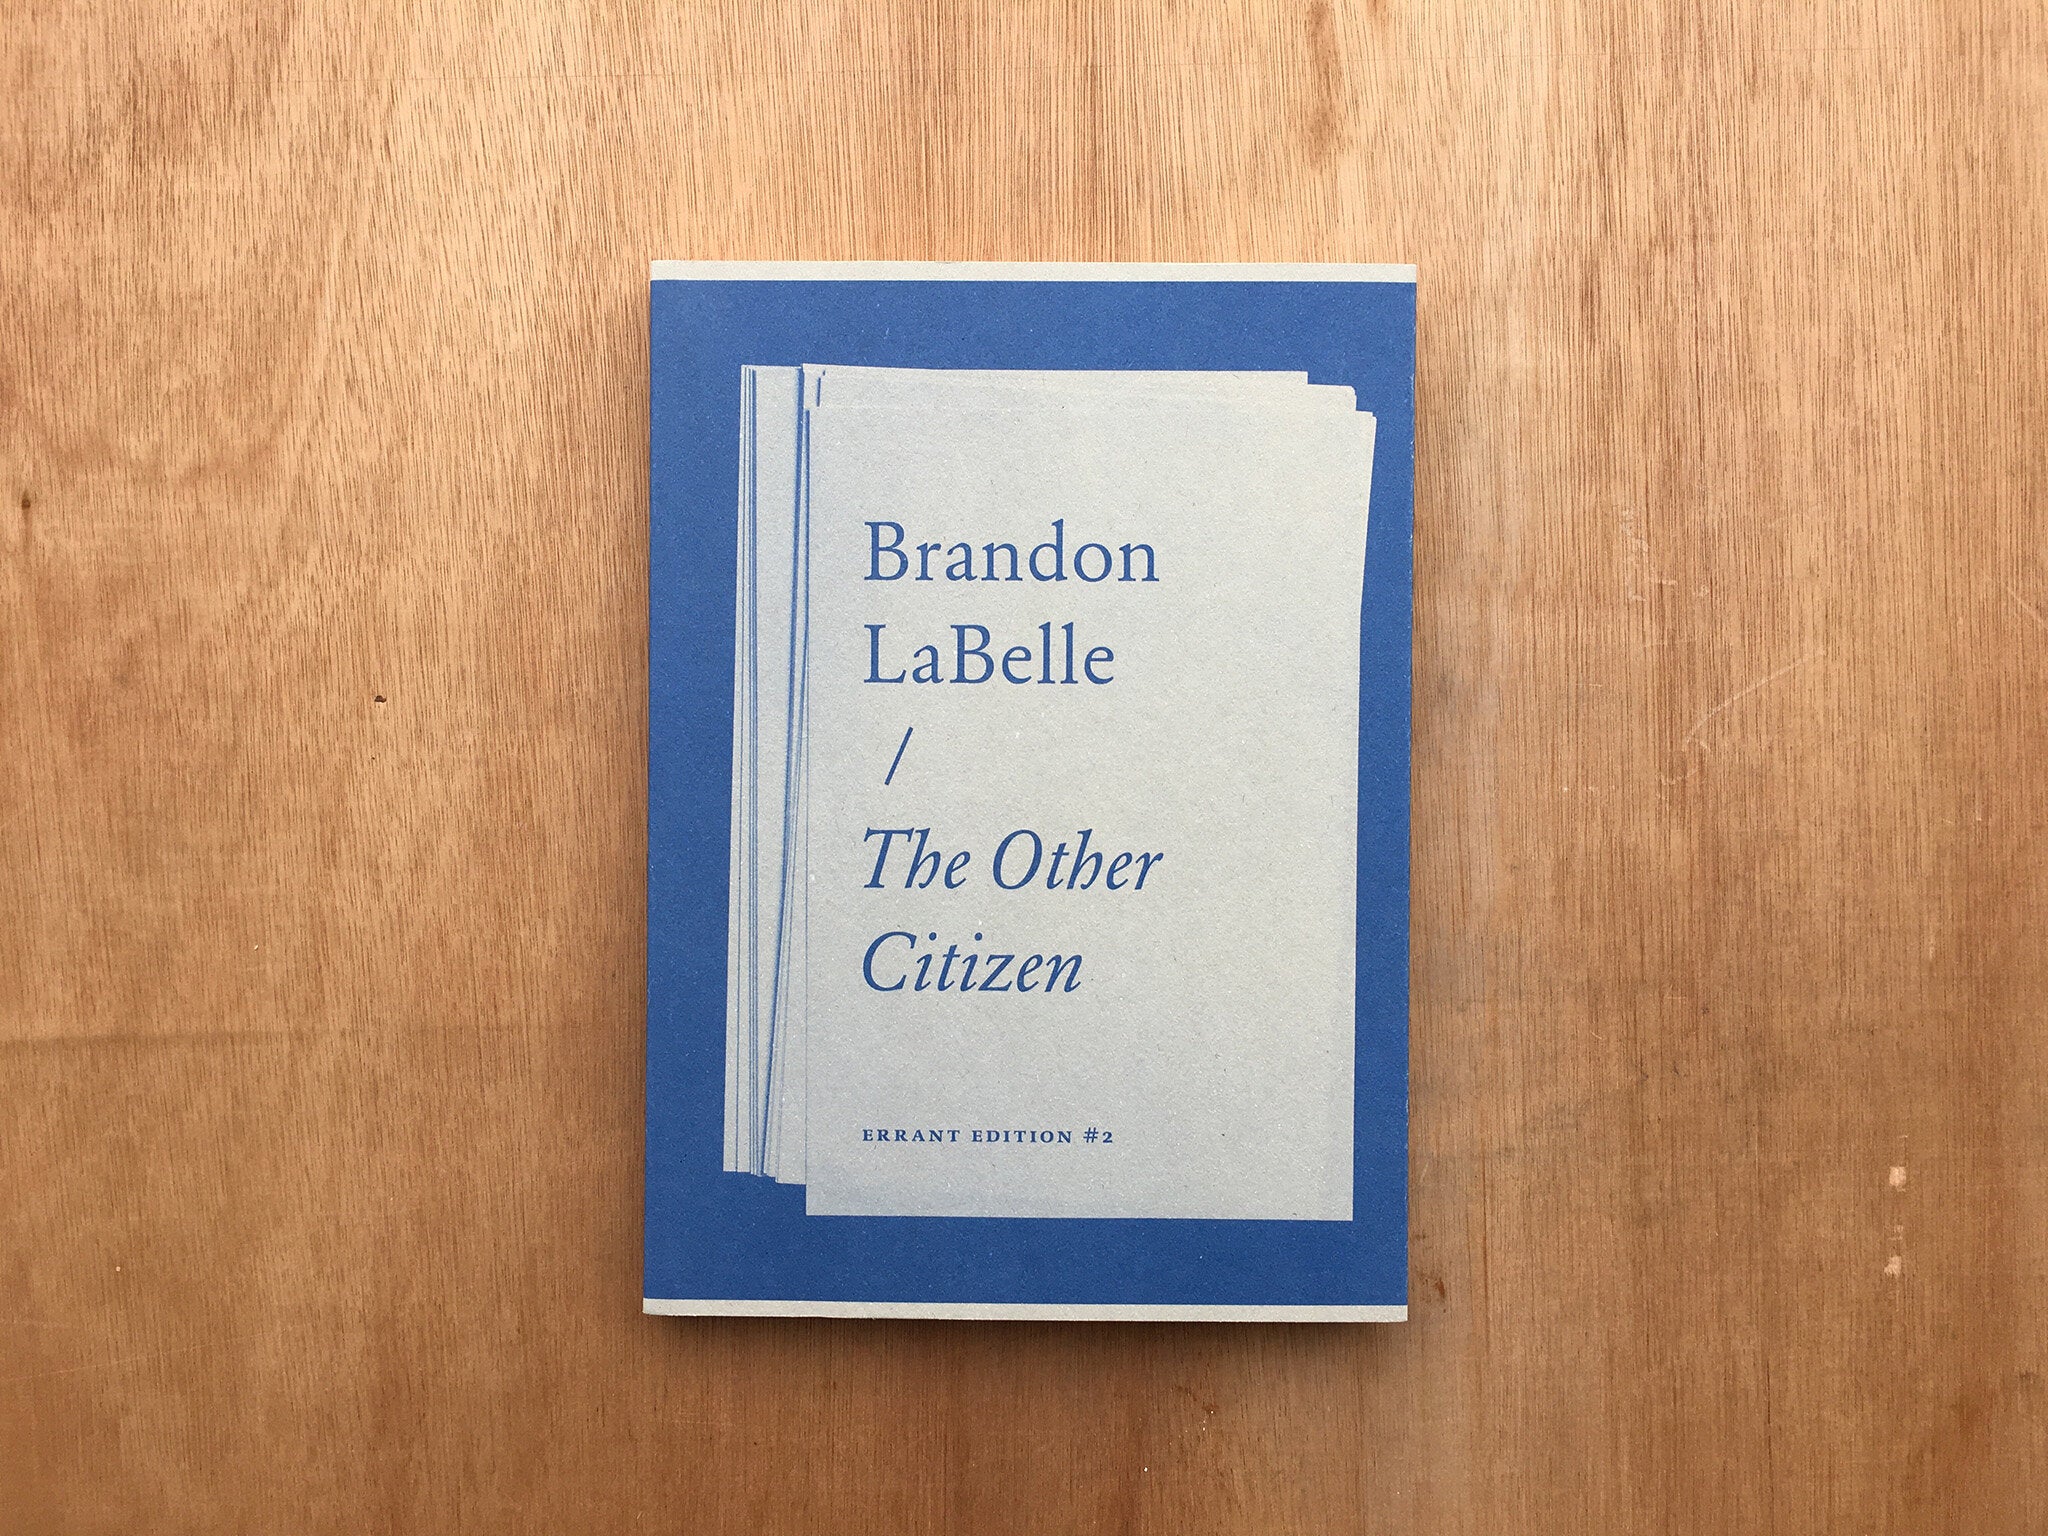 THE OTHER CITIZEN by Brandon LaBelle